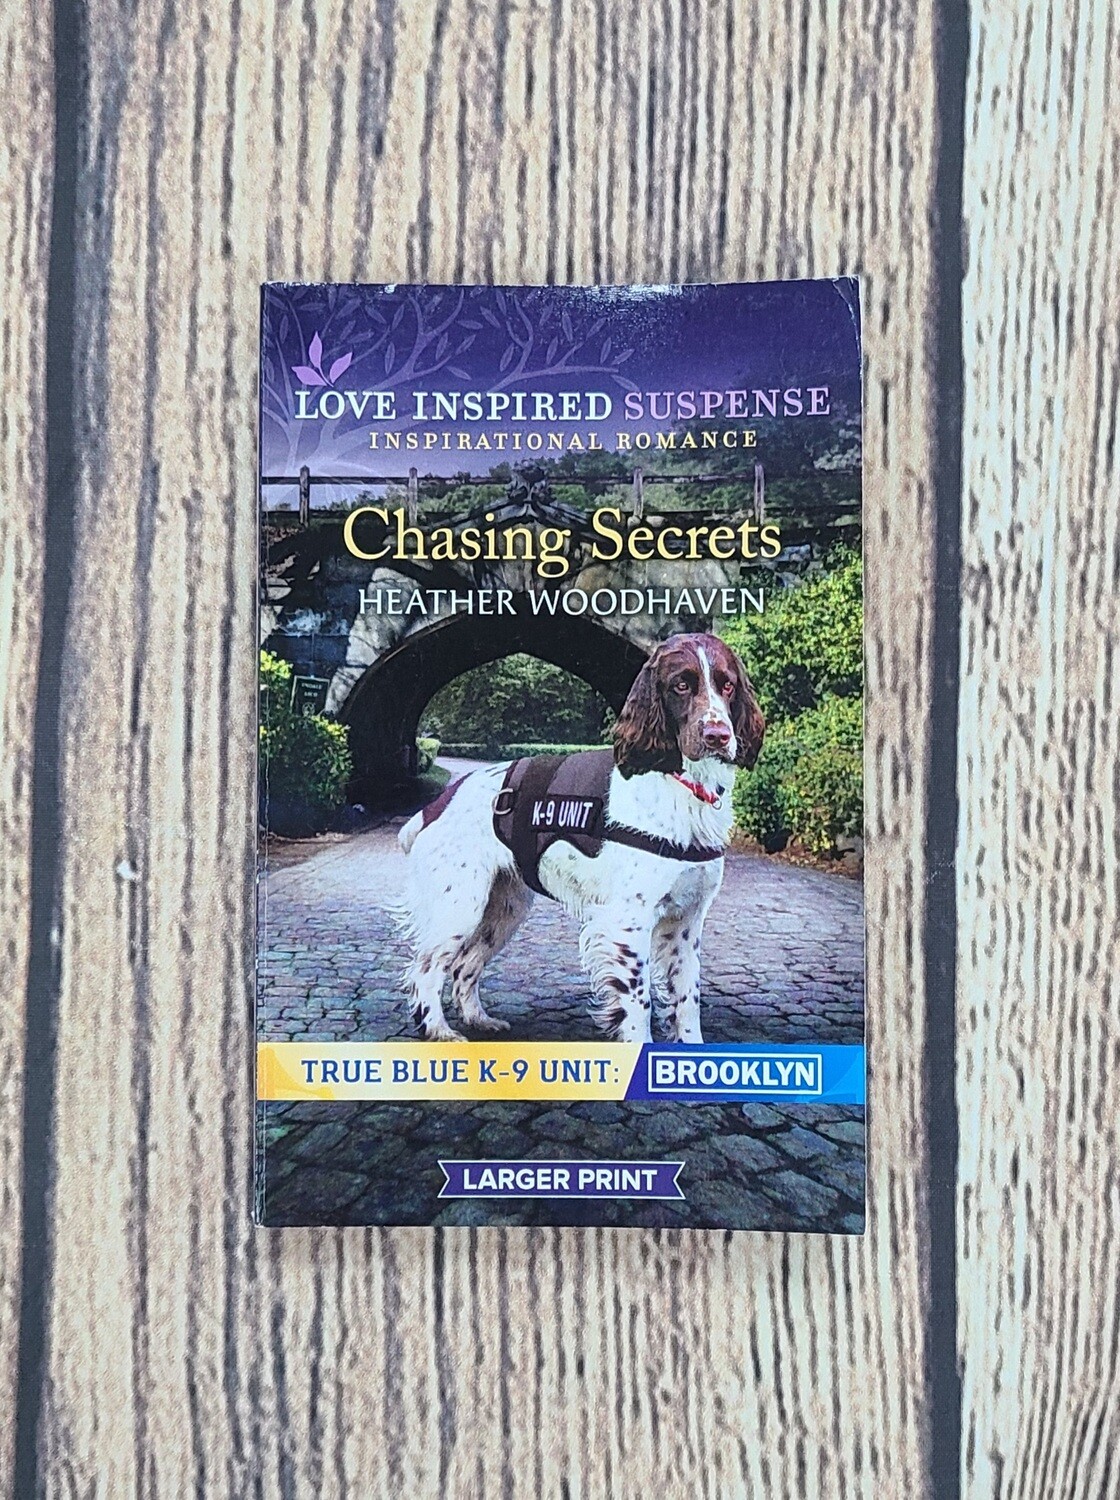 True Blue K-9 Unit: Brooklyn - Chasing Secrets by Heather Woodhaven - Larger Print - Great Condition